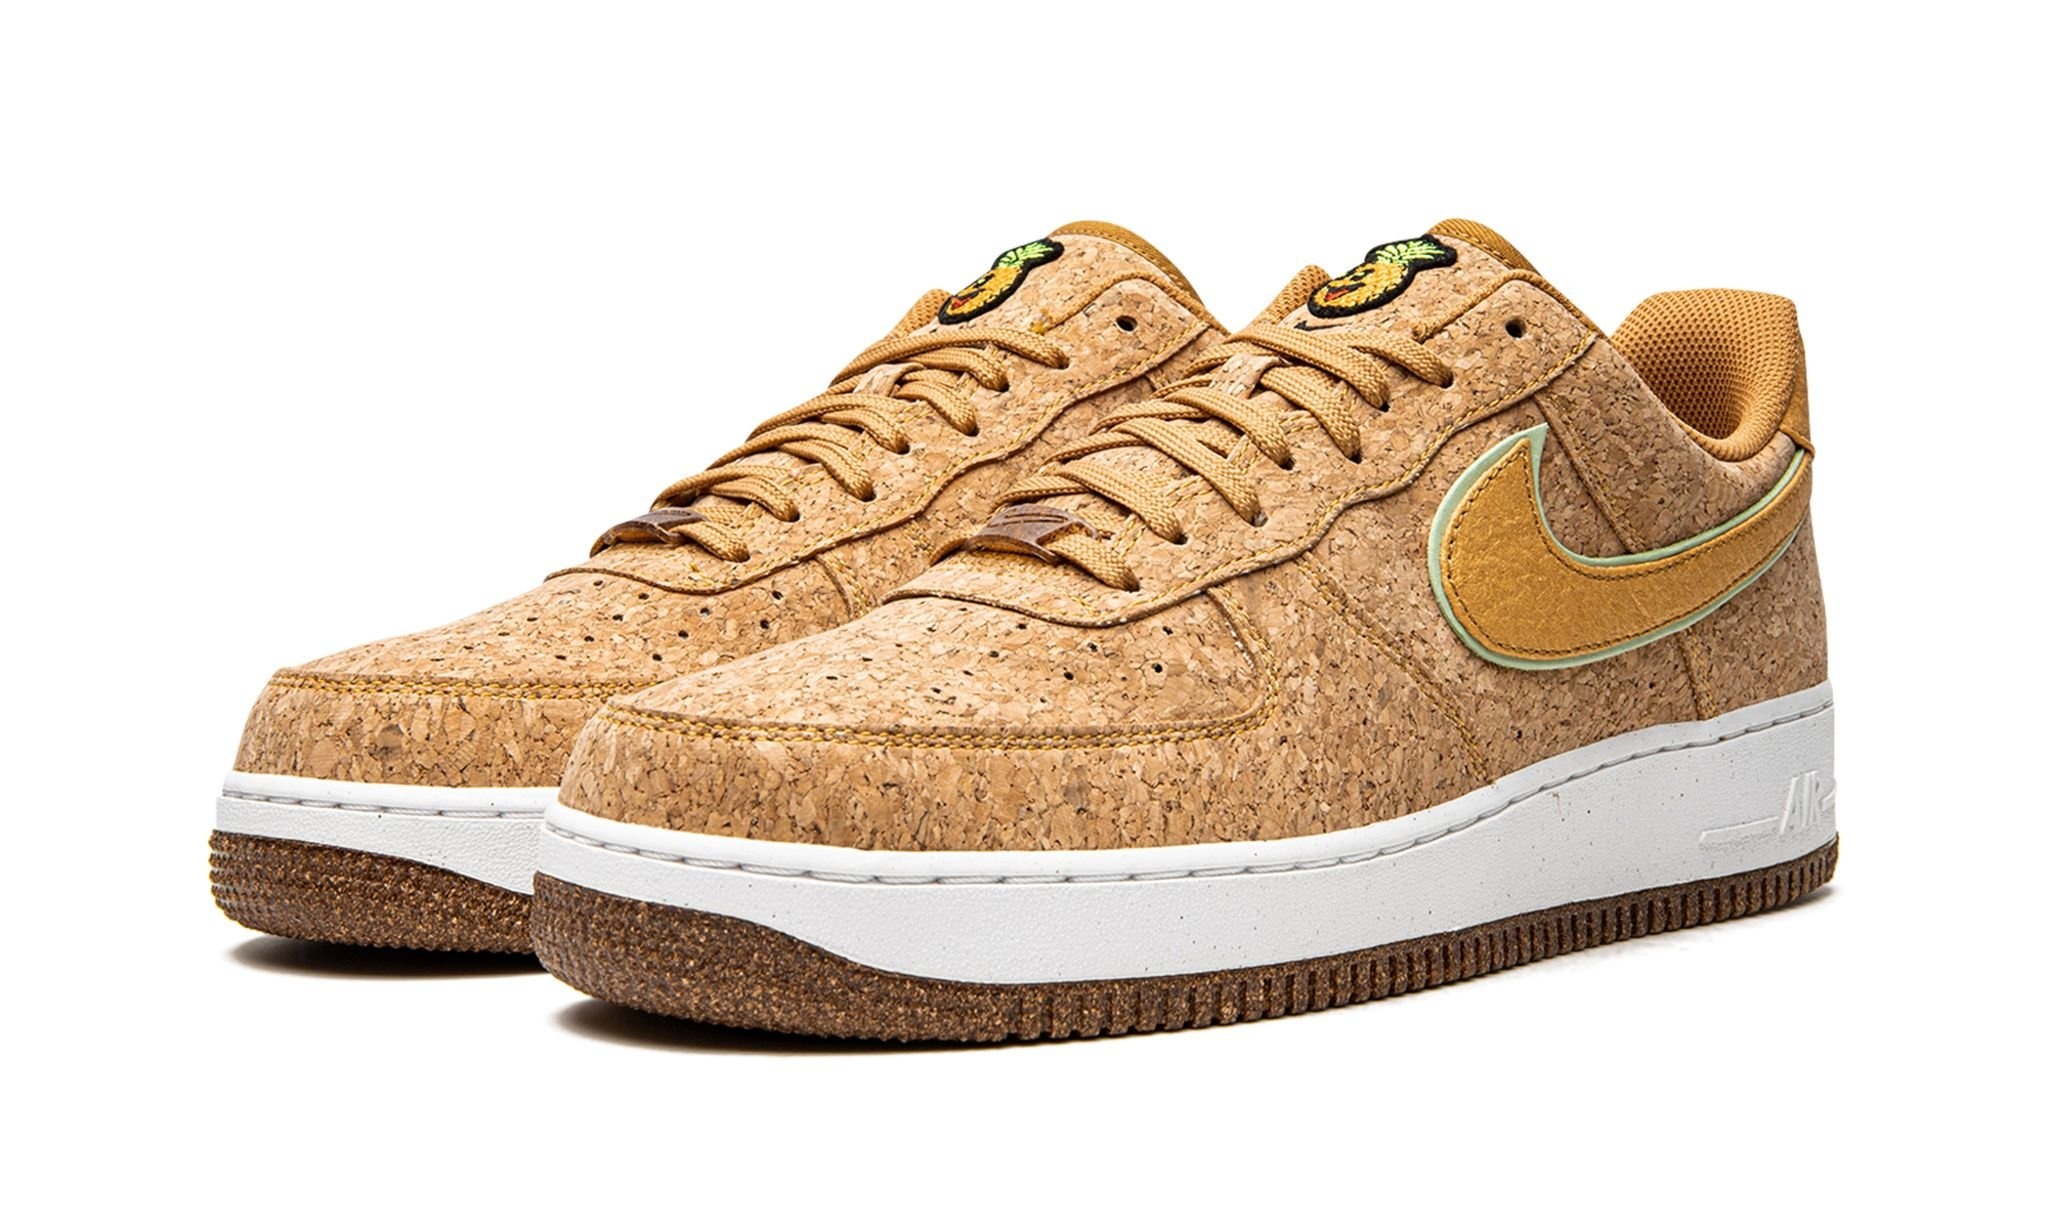 Air Force 1 Low "Happy Pineapple" - 2